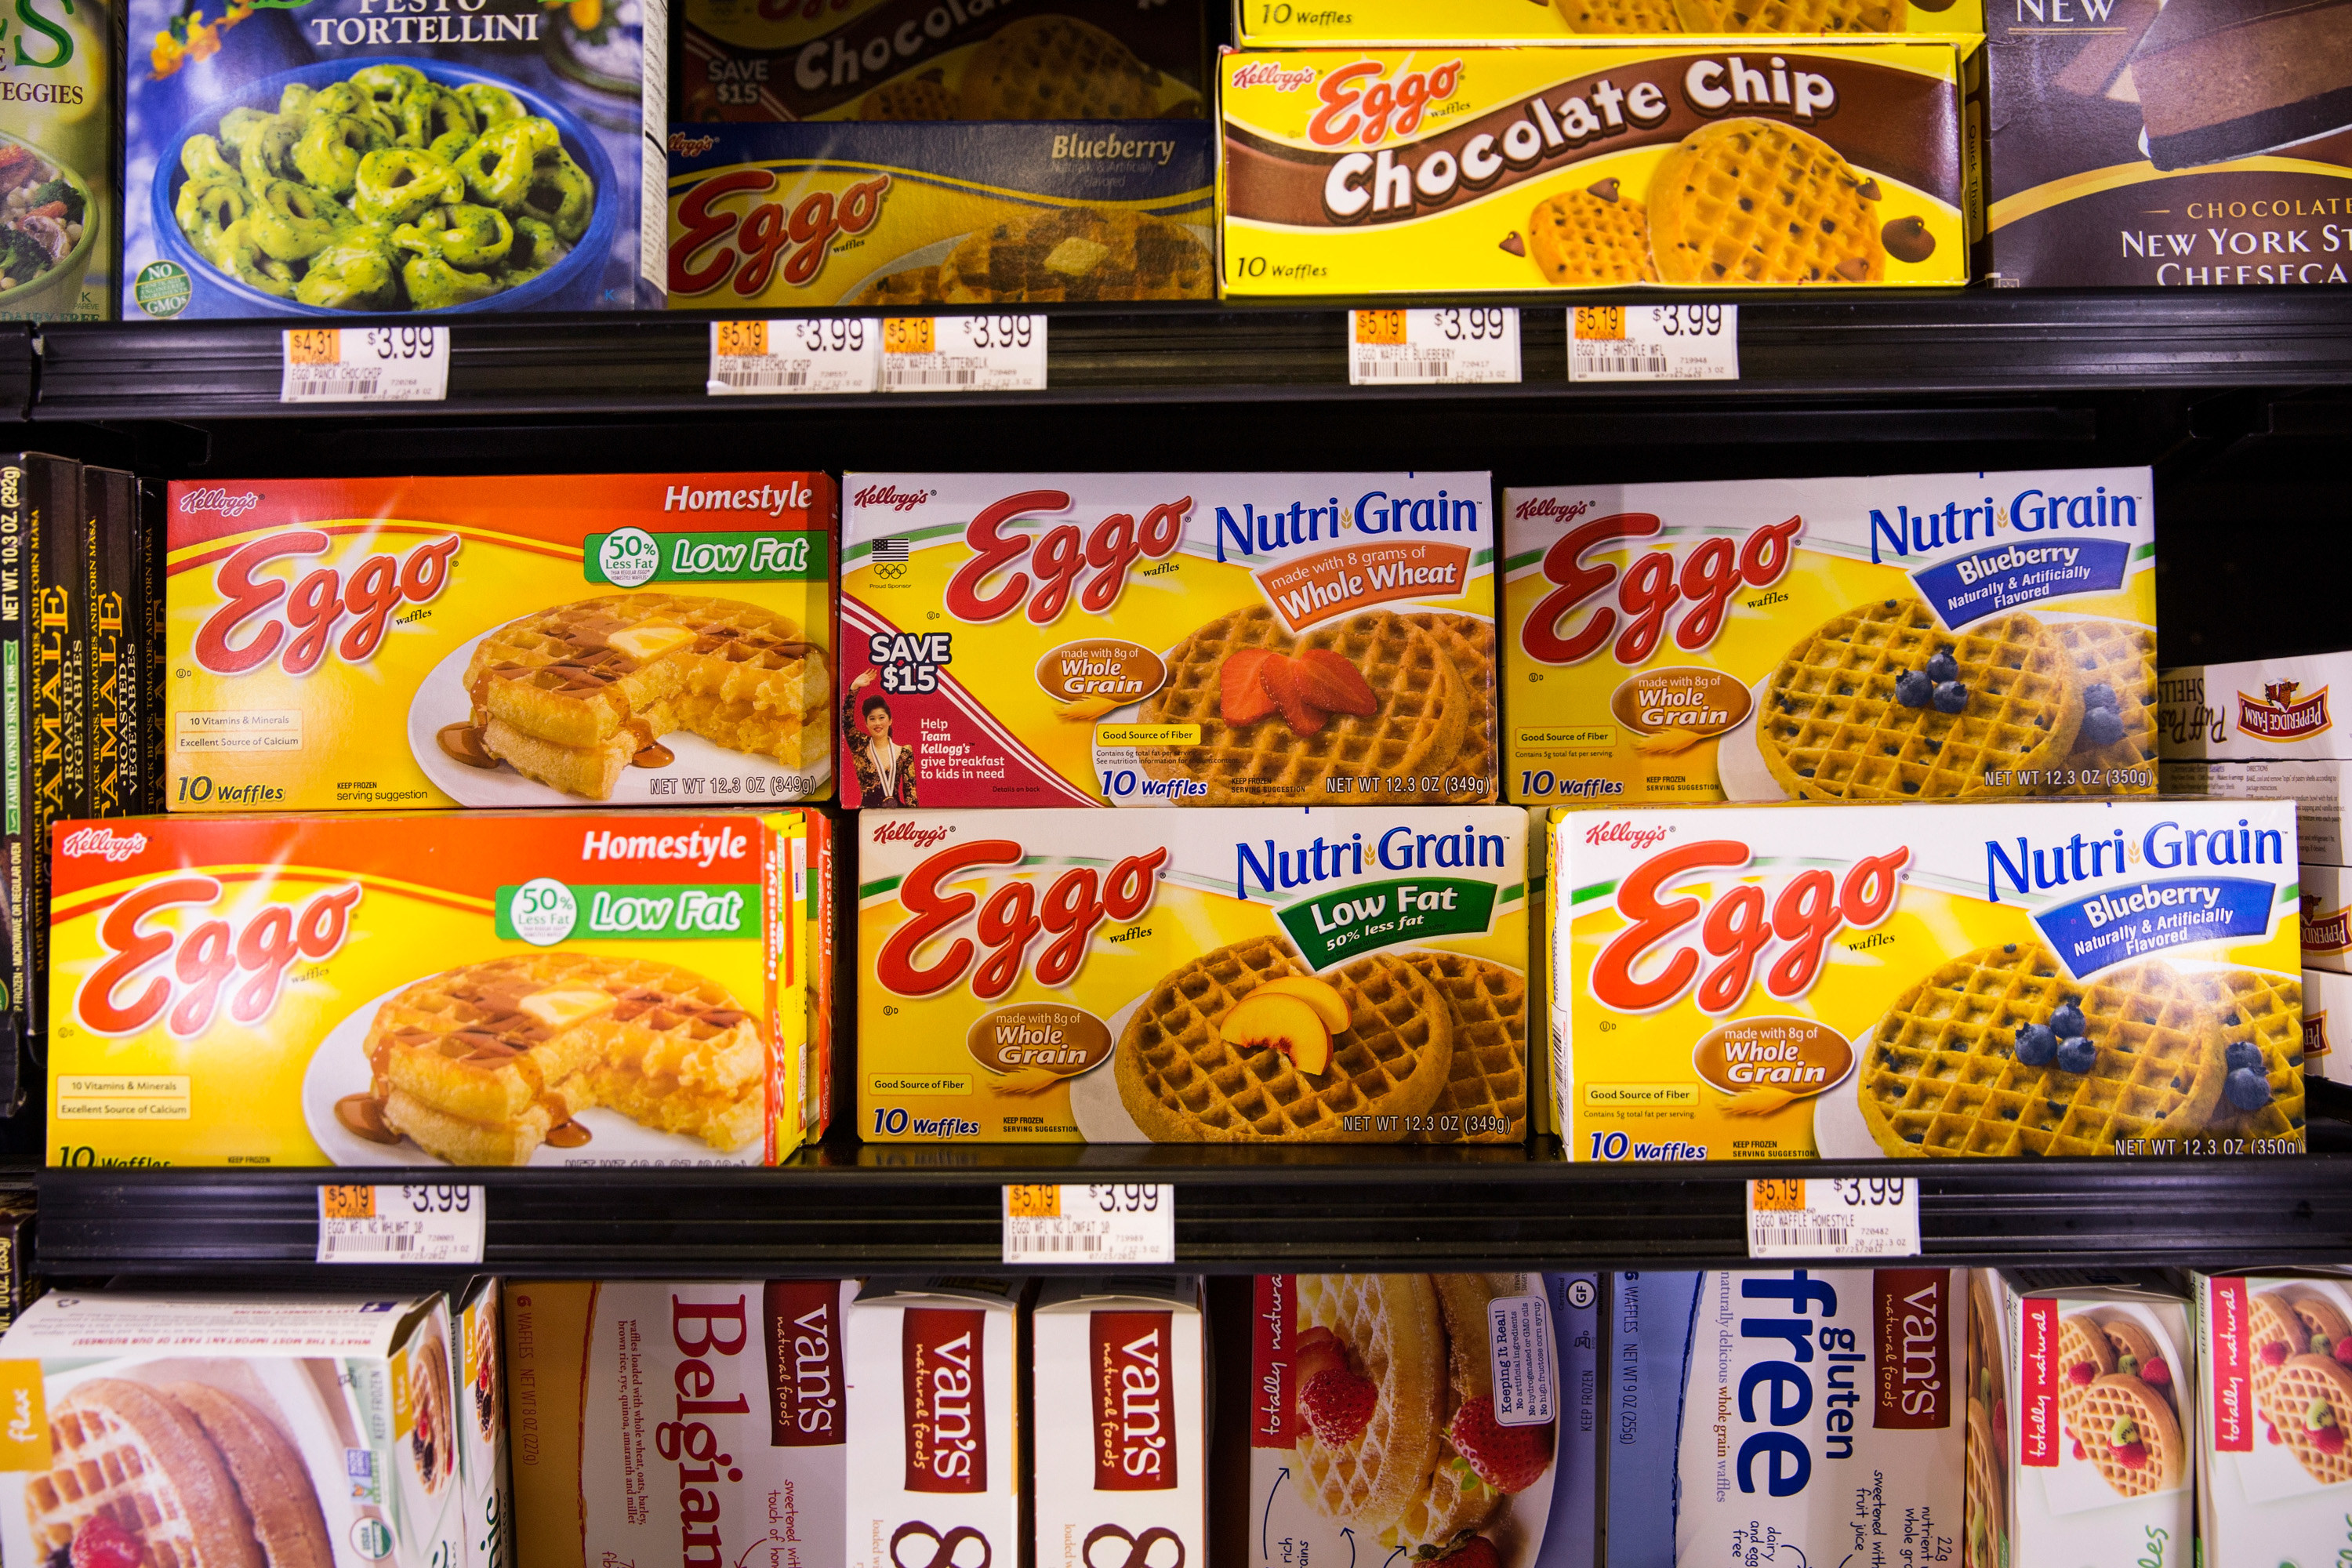 A close-up of Eggo waffles in a store